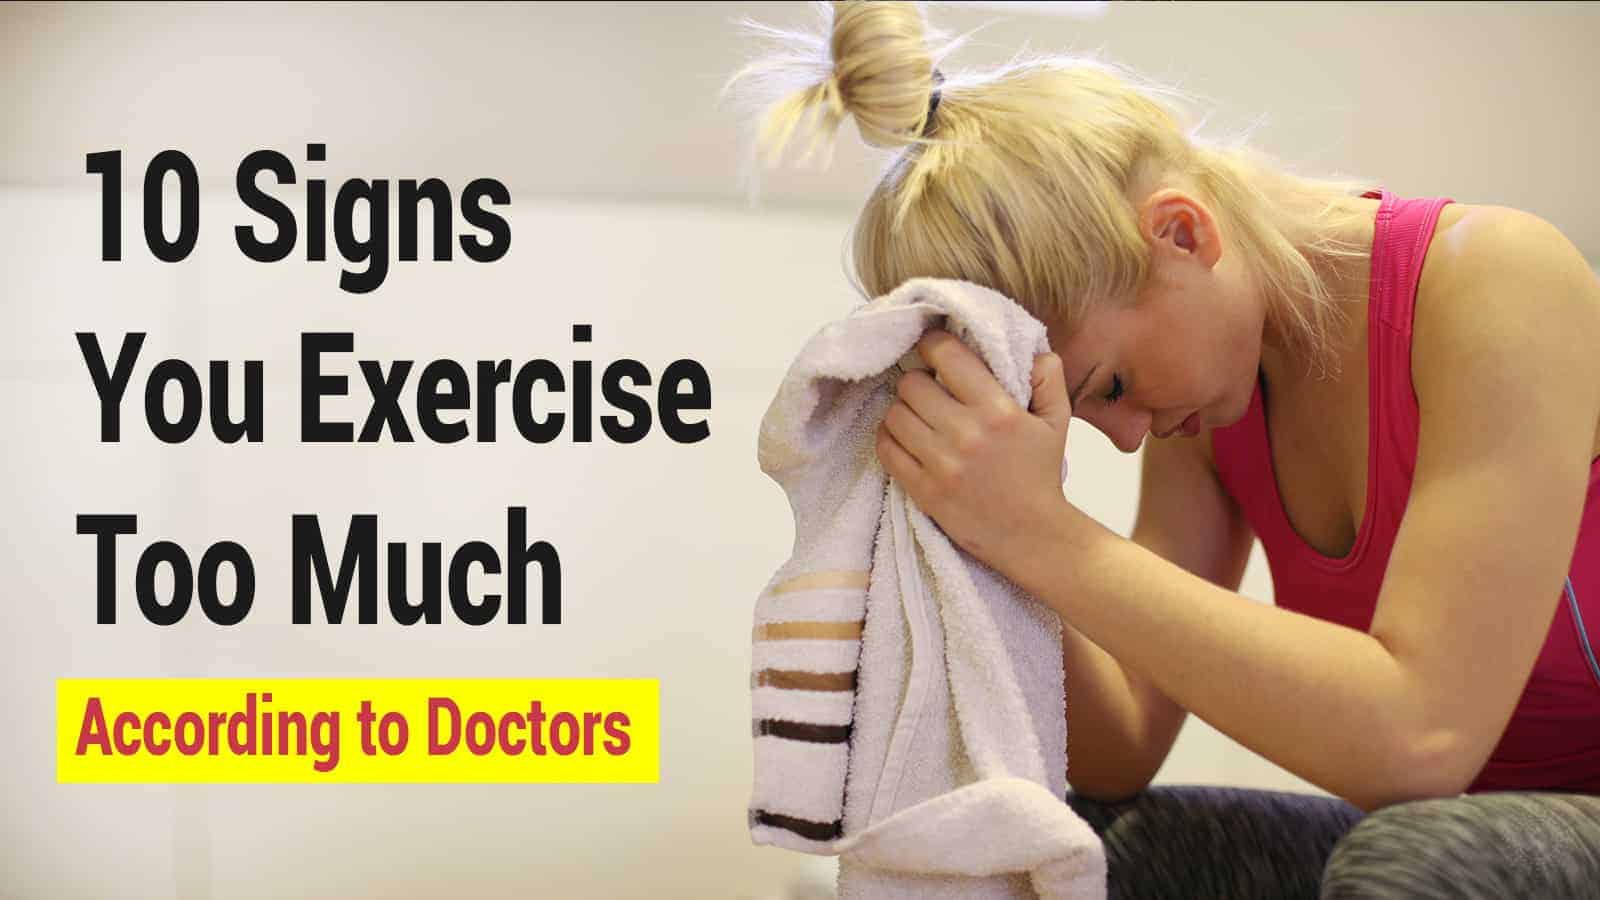 10 Signs You Exercise Too Much, According to Doctors